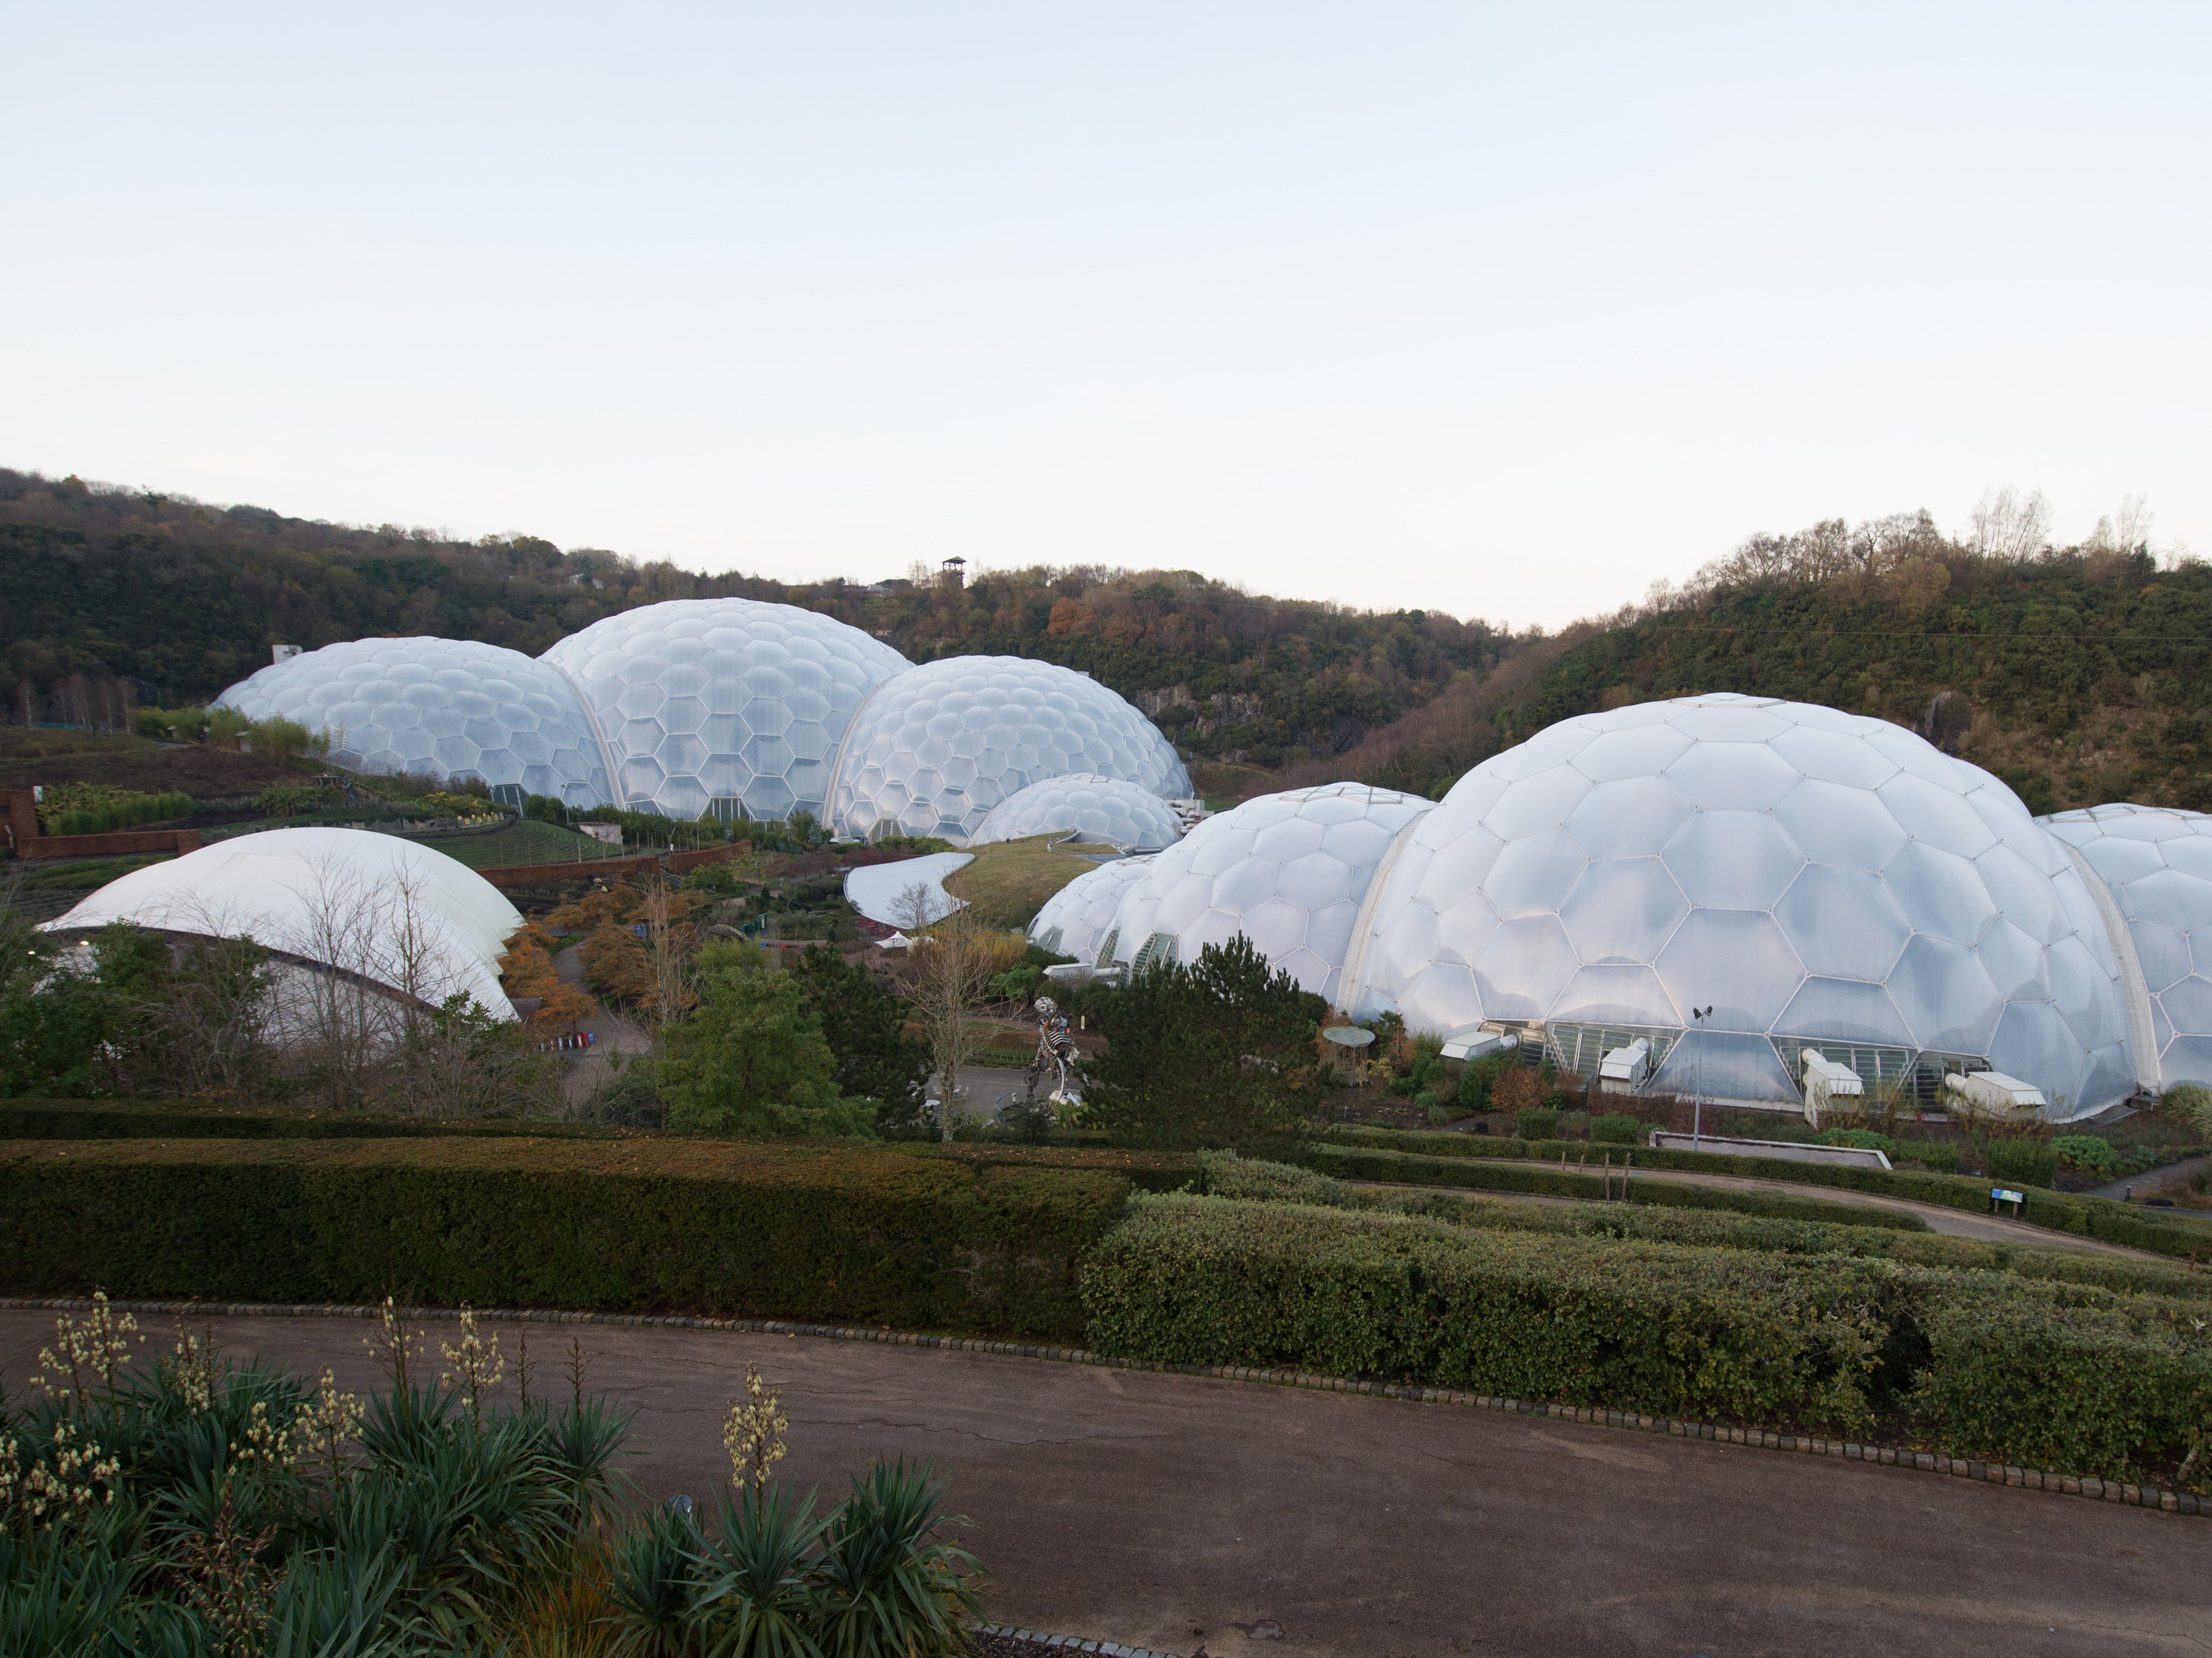 Levelling up is bringing the Eden Project (pictured) to Morecambe, where the local council is grappling with a £4.2m budget black hole